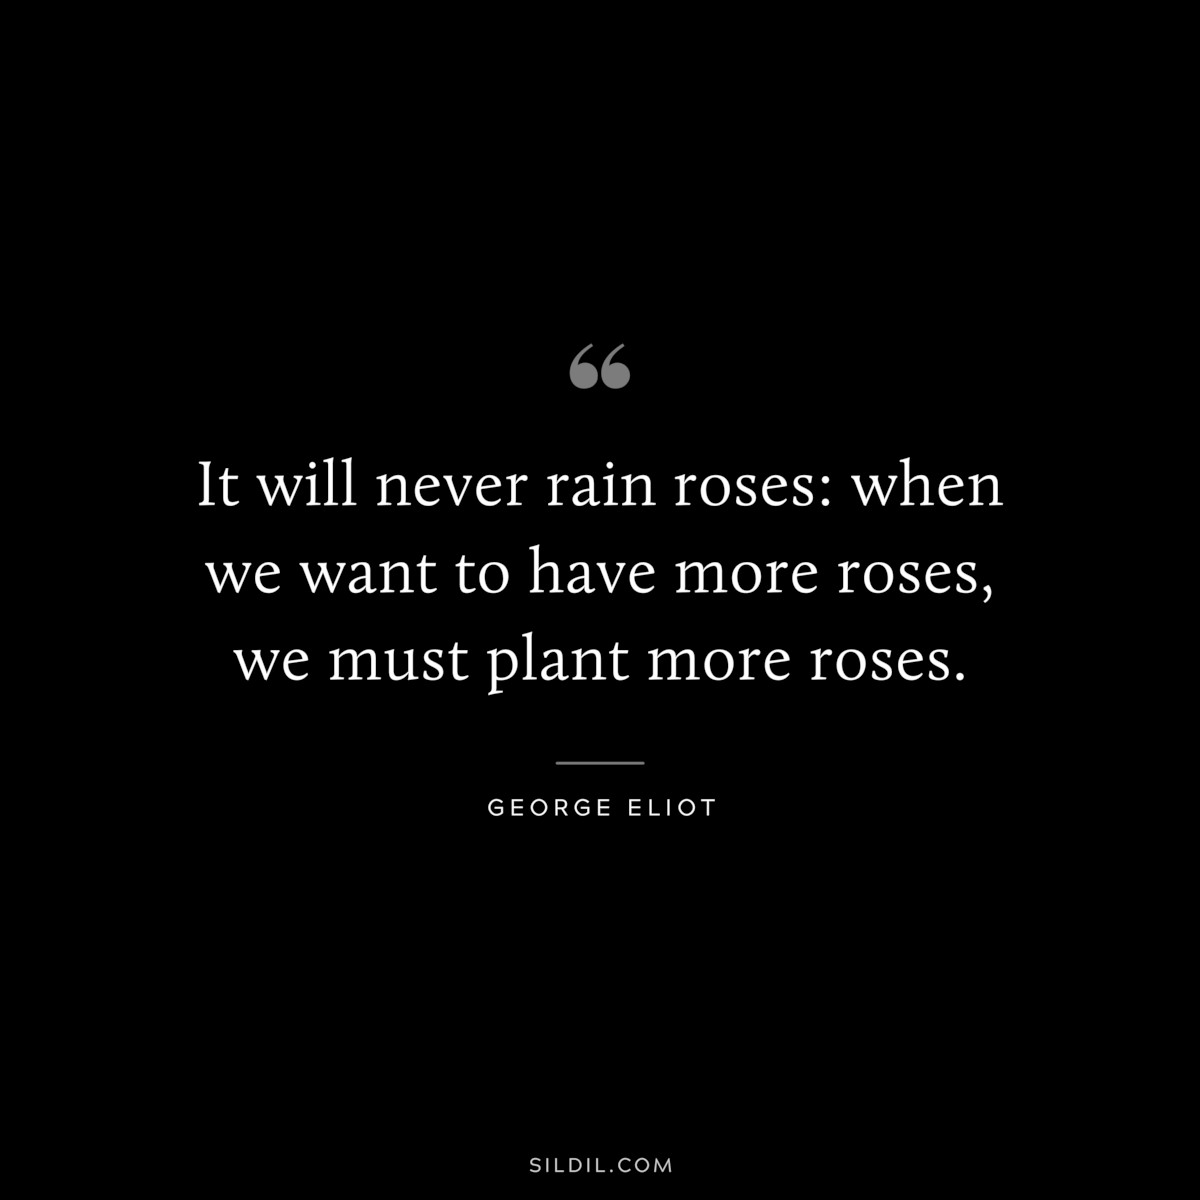 It will never rain roses: when we want to have more roses, we must plant more roses. ― George Eliot